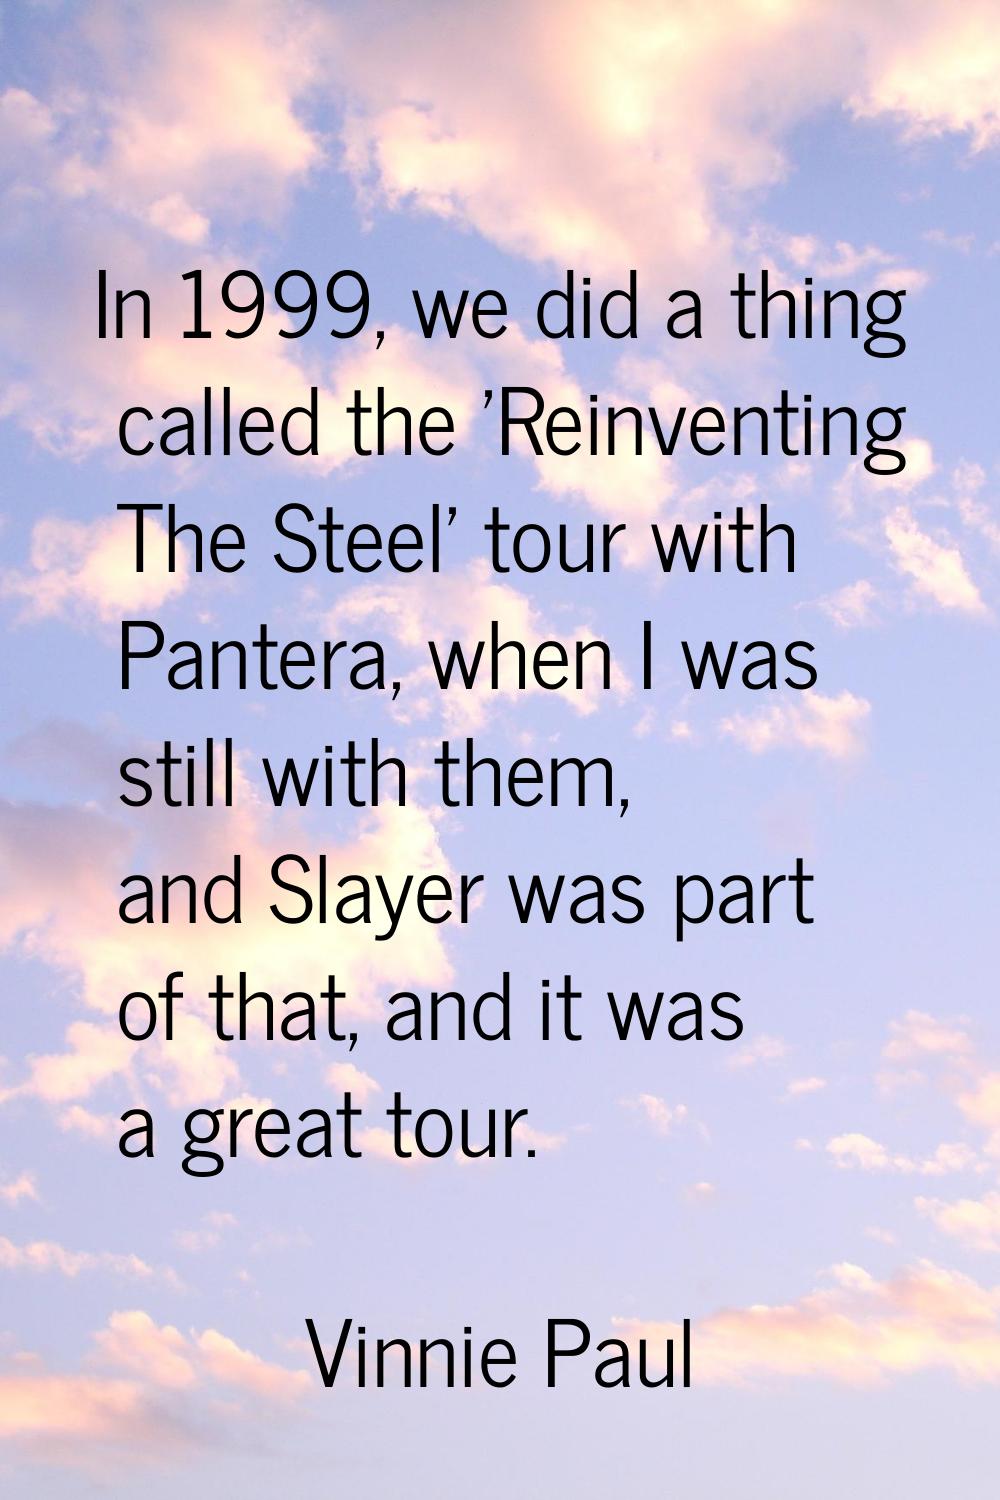 In 1999, we did a thing called the 'Reinventing The Steel' tour with Pantera, when I was still with